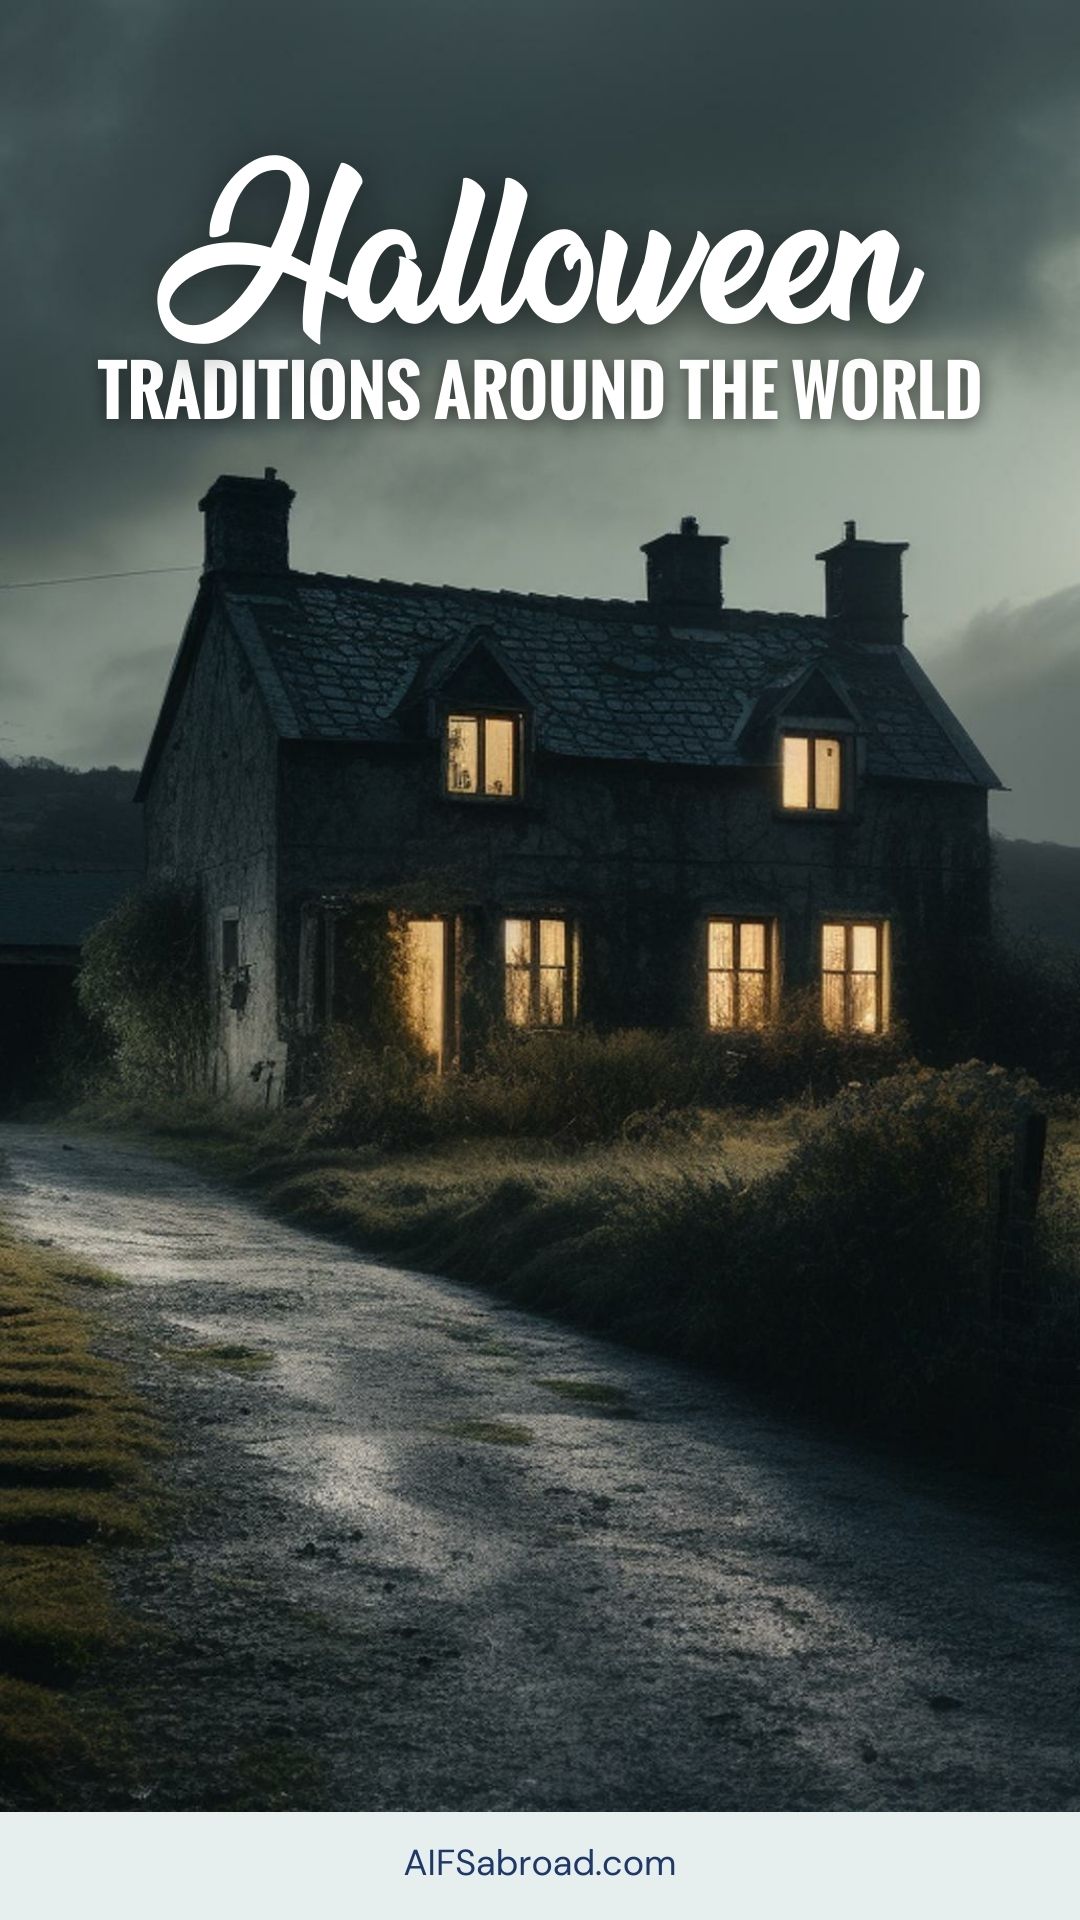 Pin image: Spooky house in Ireland with text saying "Halloween traditions around the world"